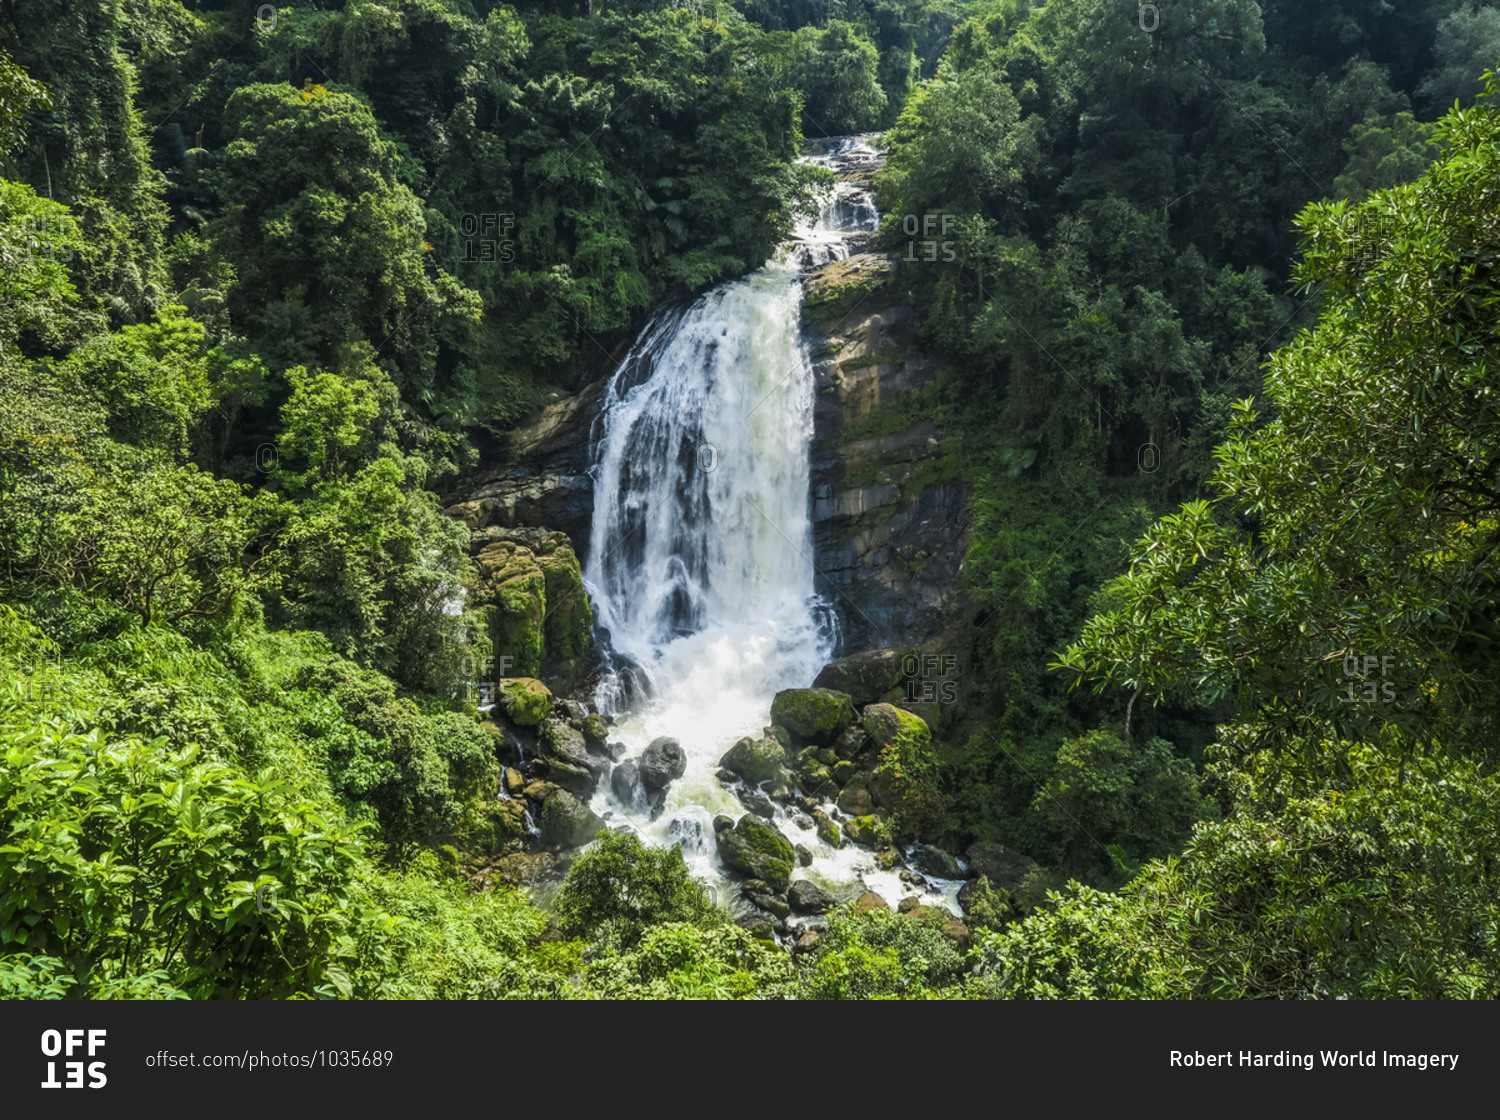 The 70m Valara Waterfall on the Deviyar River after Monsoon, a popular sight on the road to Munnar, Idukki district, Kerala, India, Asia